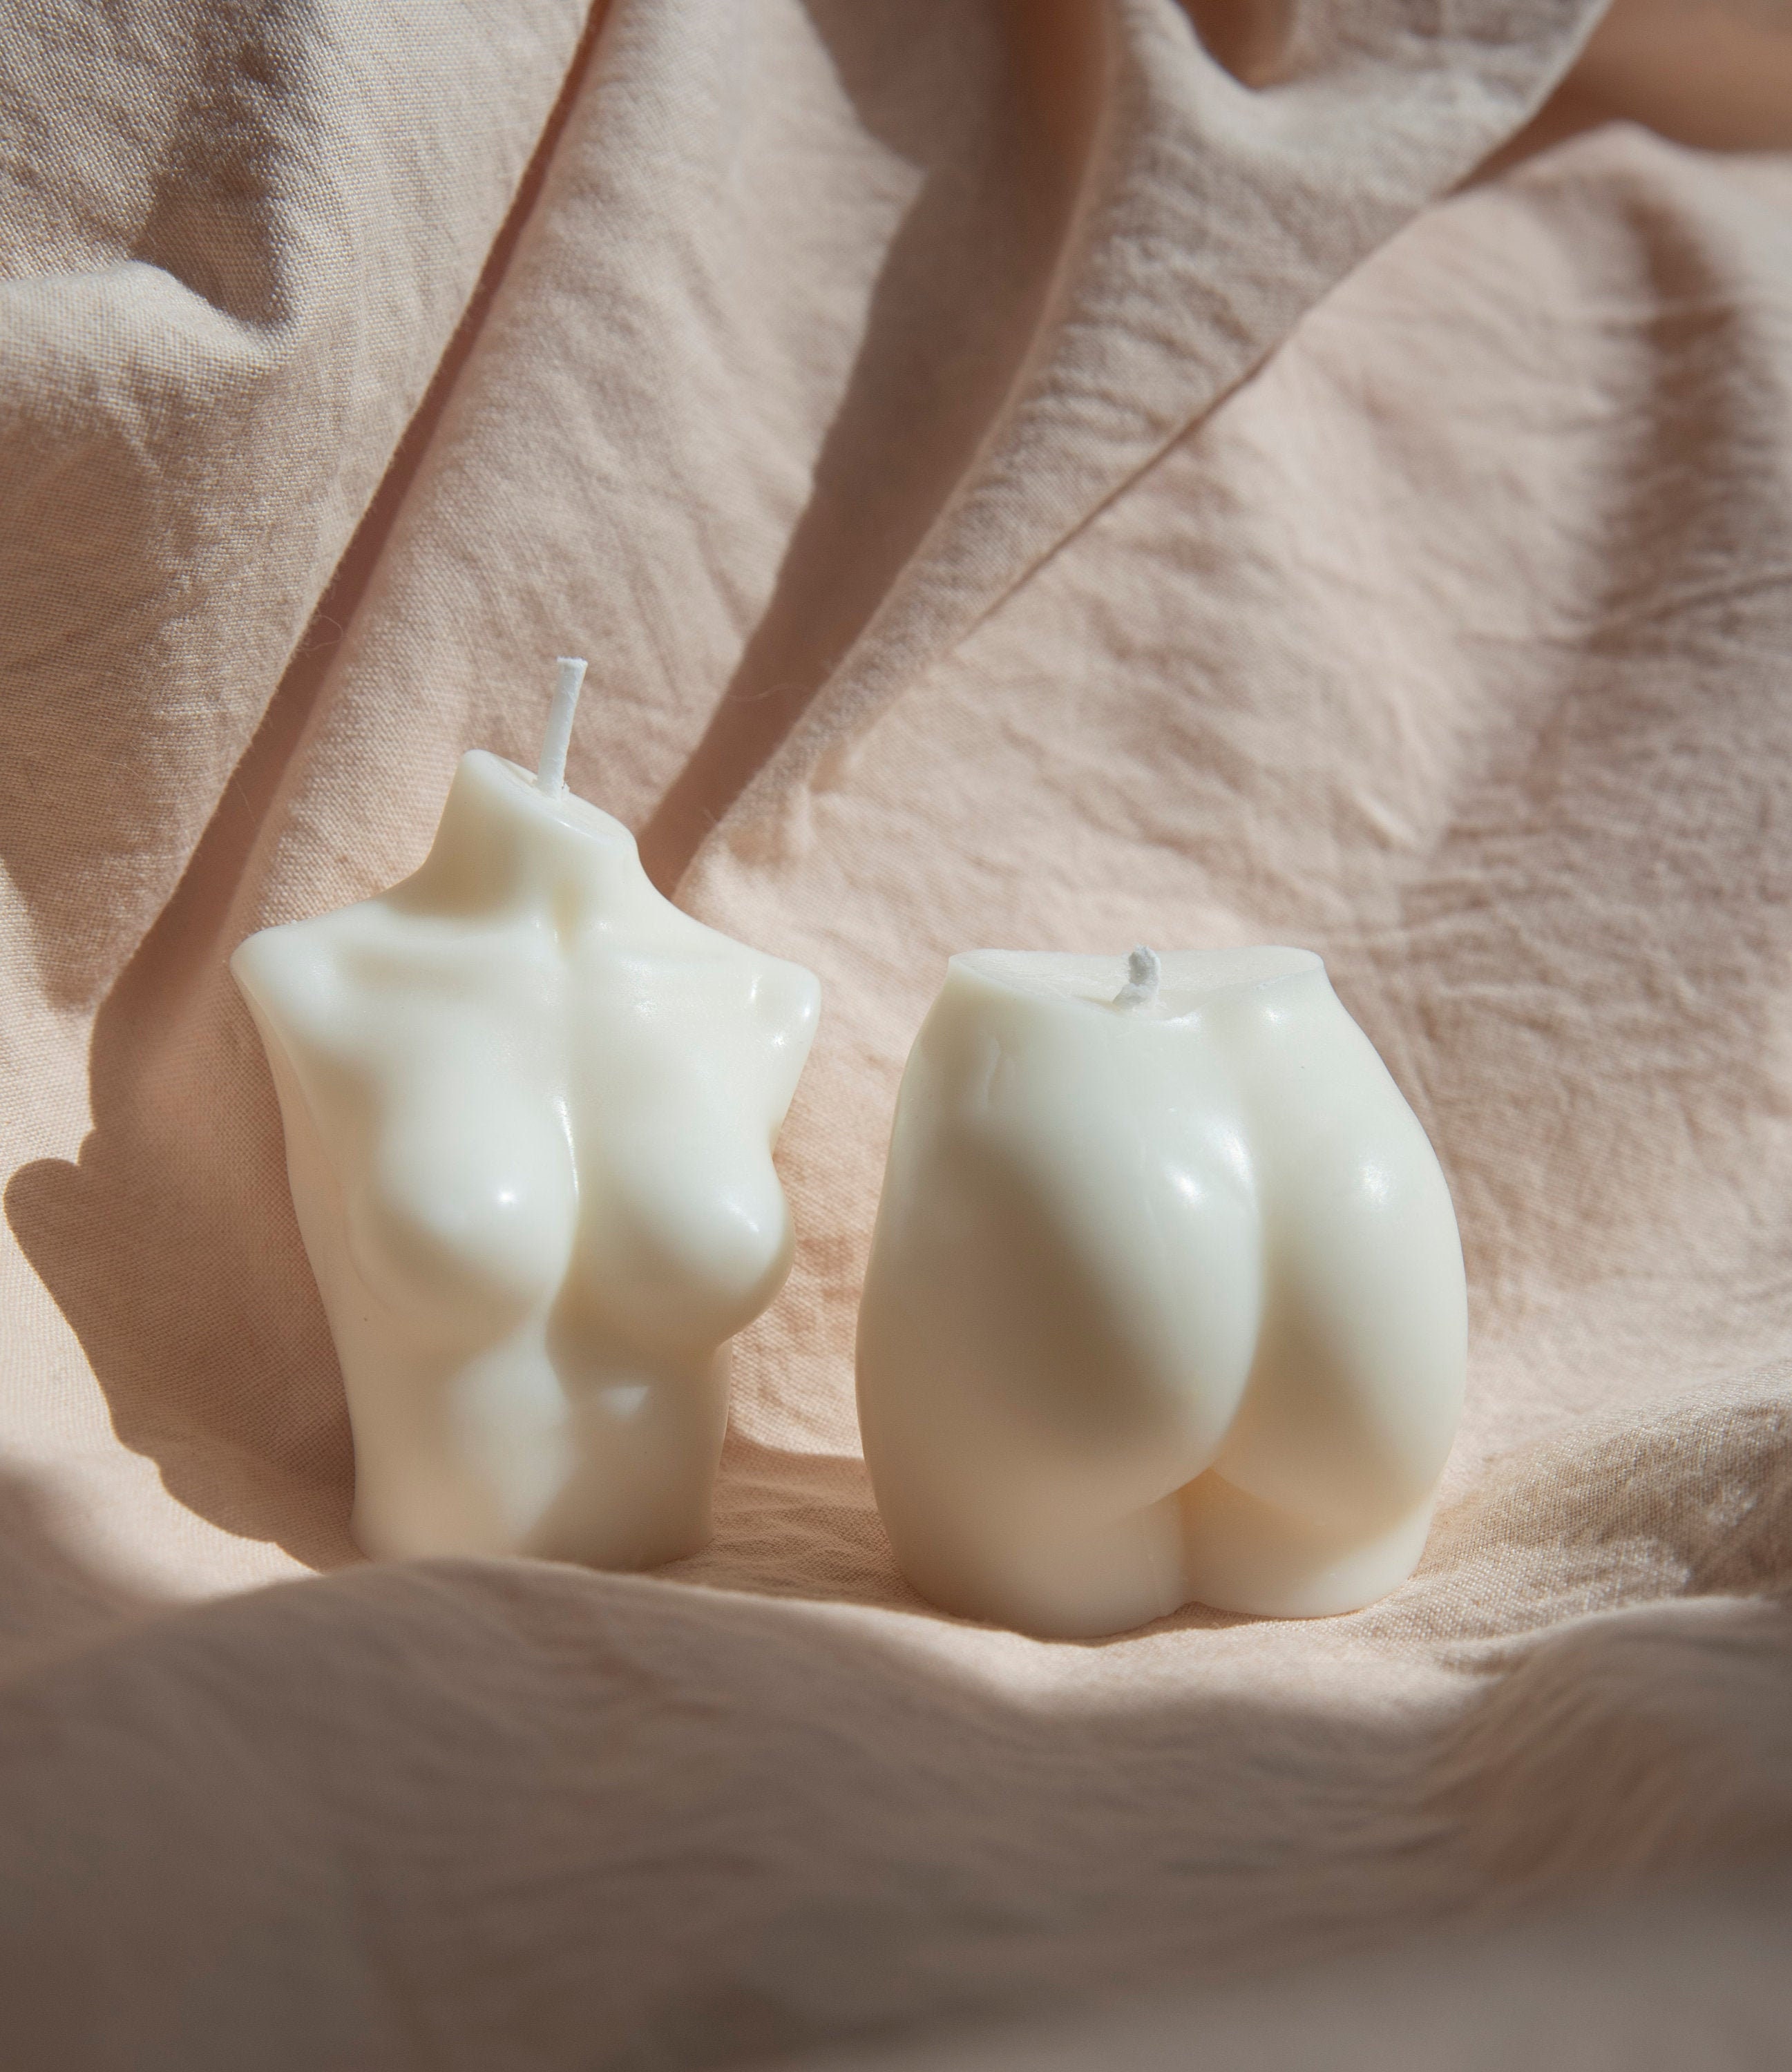 Goddess Candle Handmade Bum Tealight Woman Breasts Candle Shoulders Boobs Female Form Vase Back Wax Nude Women Waist Sexy